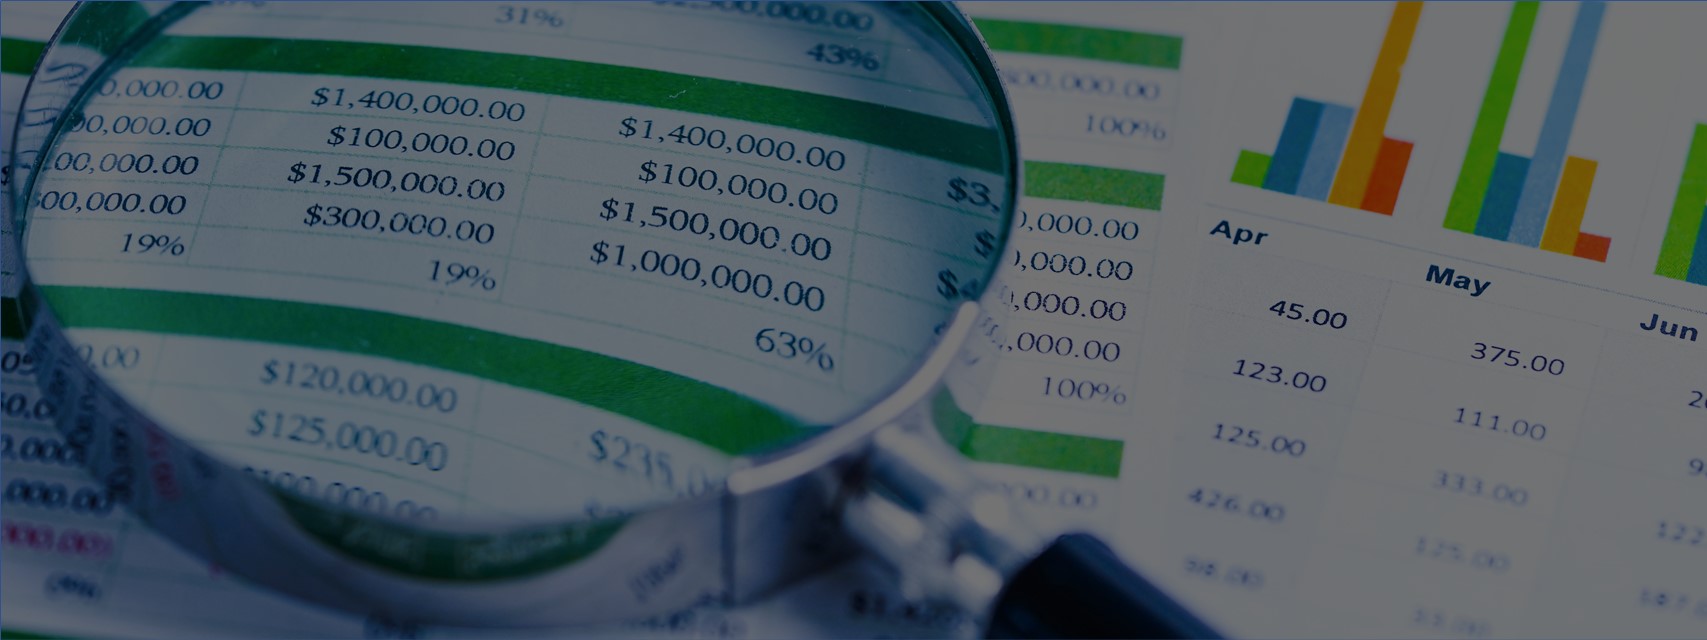 A magnifying glass placed over a printout of a spreadsheet showing dollar amounts and a chart of monthly figures.